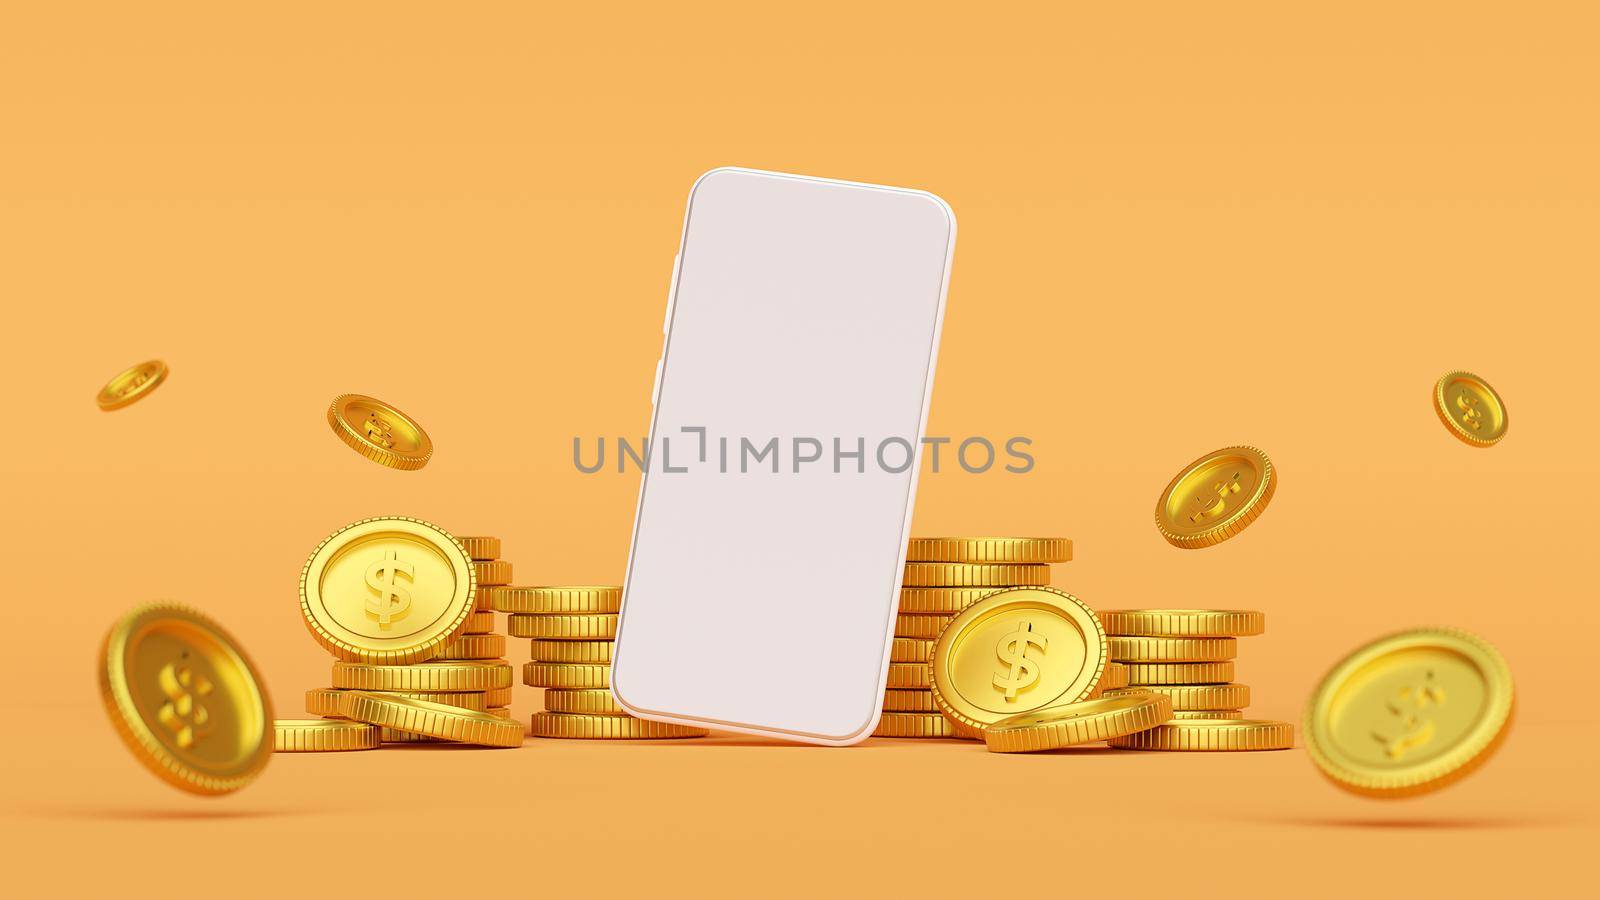 Mockup of smartphone surrounded by golden coin, 3d rendering by nutzchotwarut